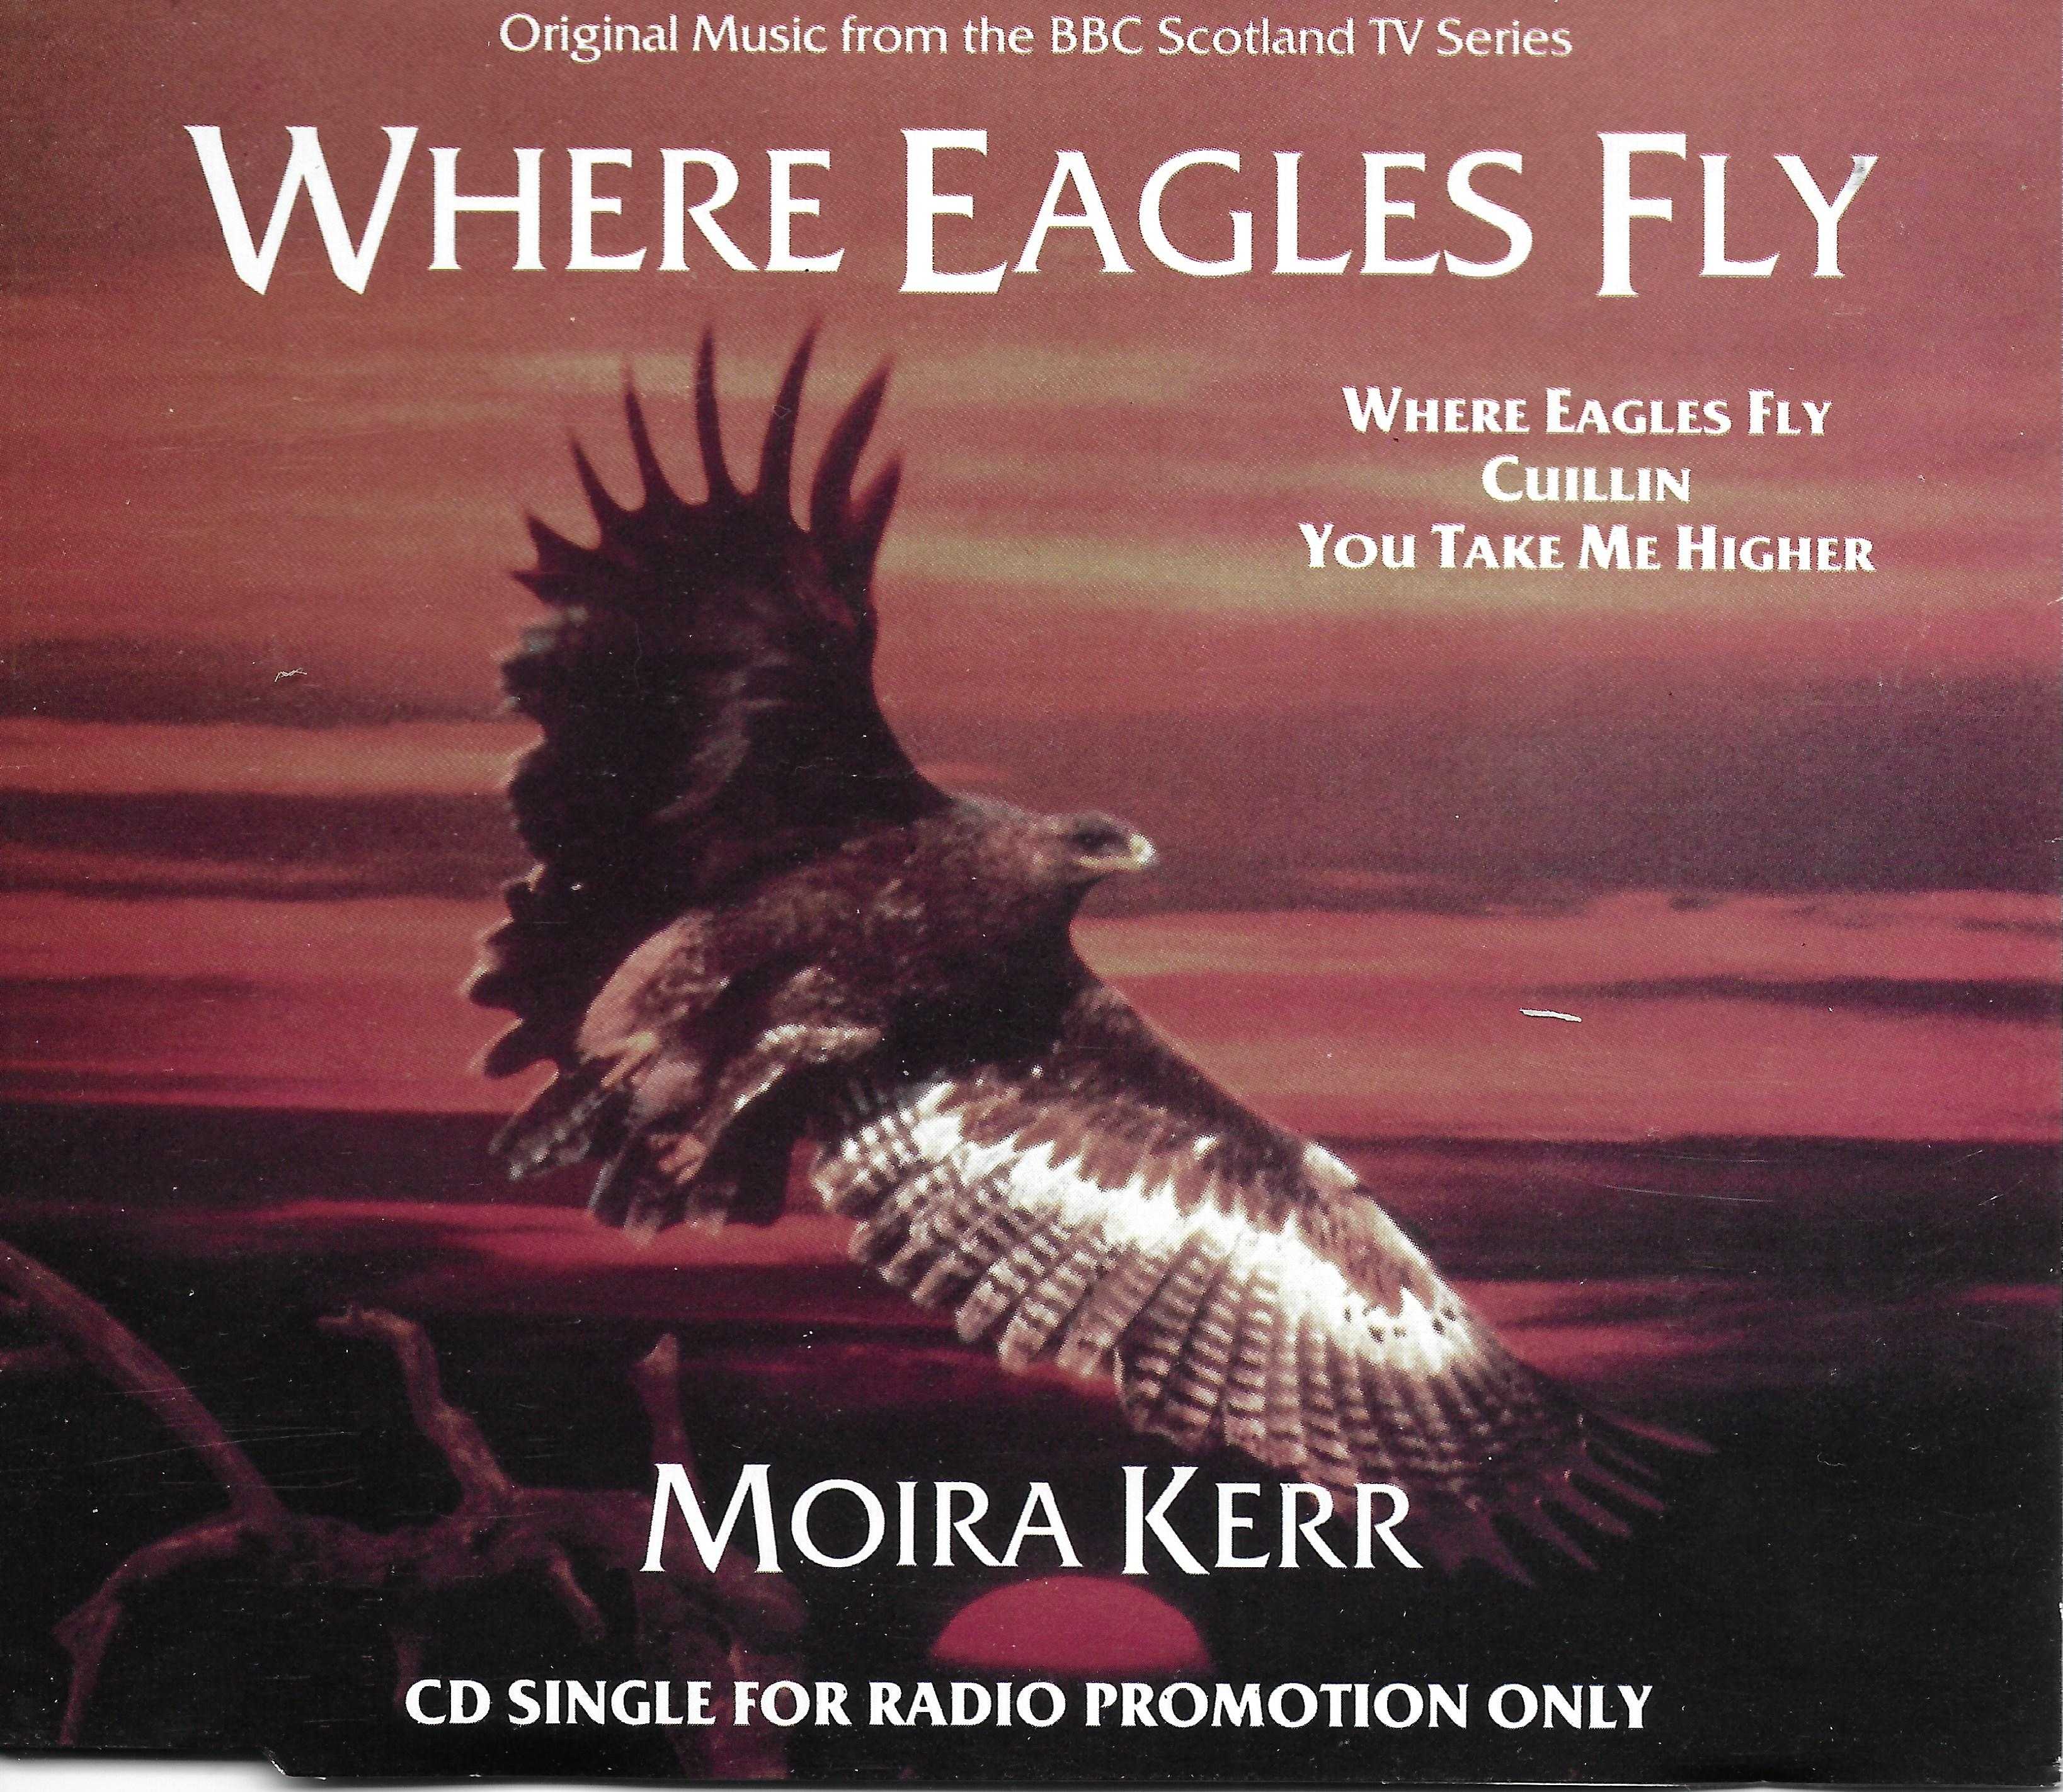 Picture of RAD CD 1 Where eagles fly by artist Moira Kerr from the BBC cdsingles - Records and Tapes library